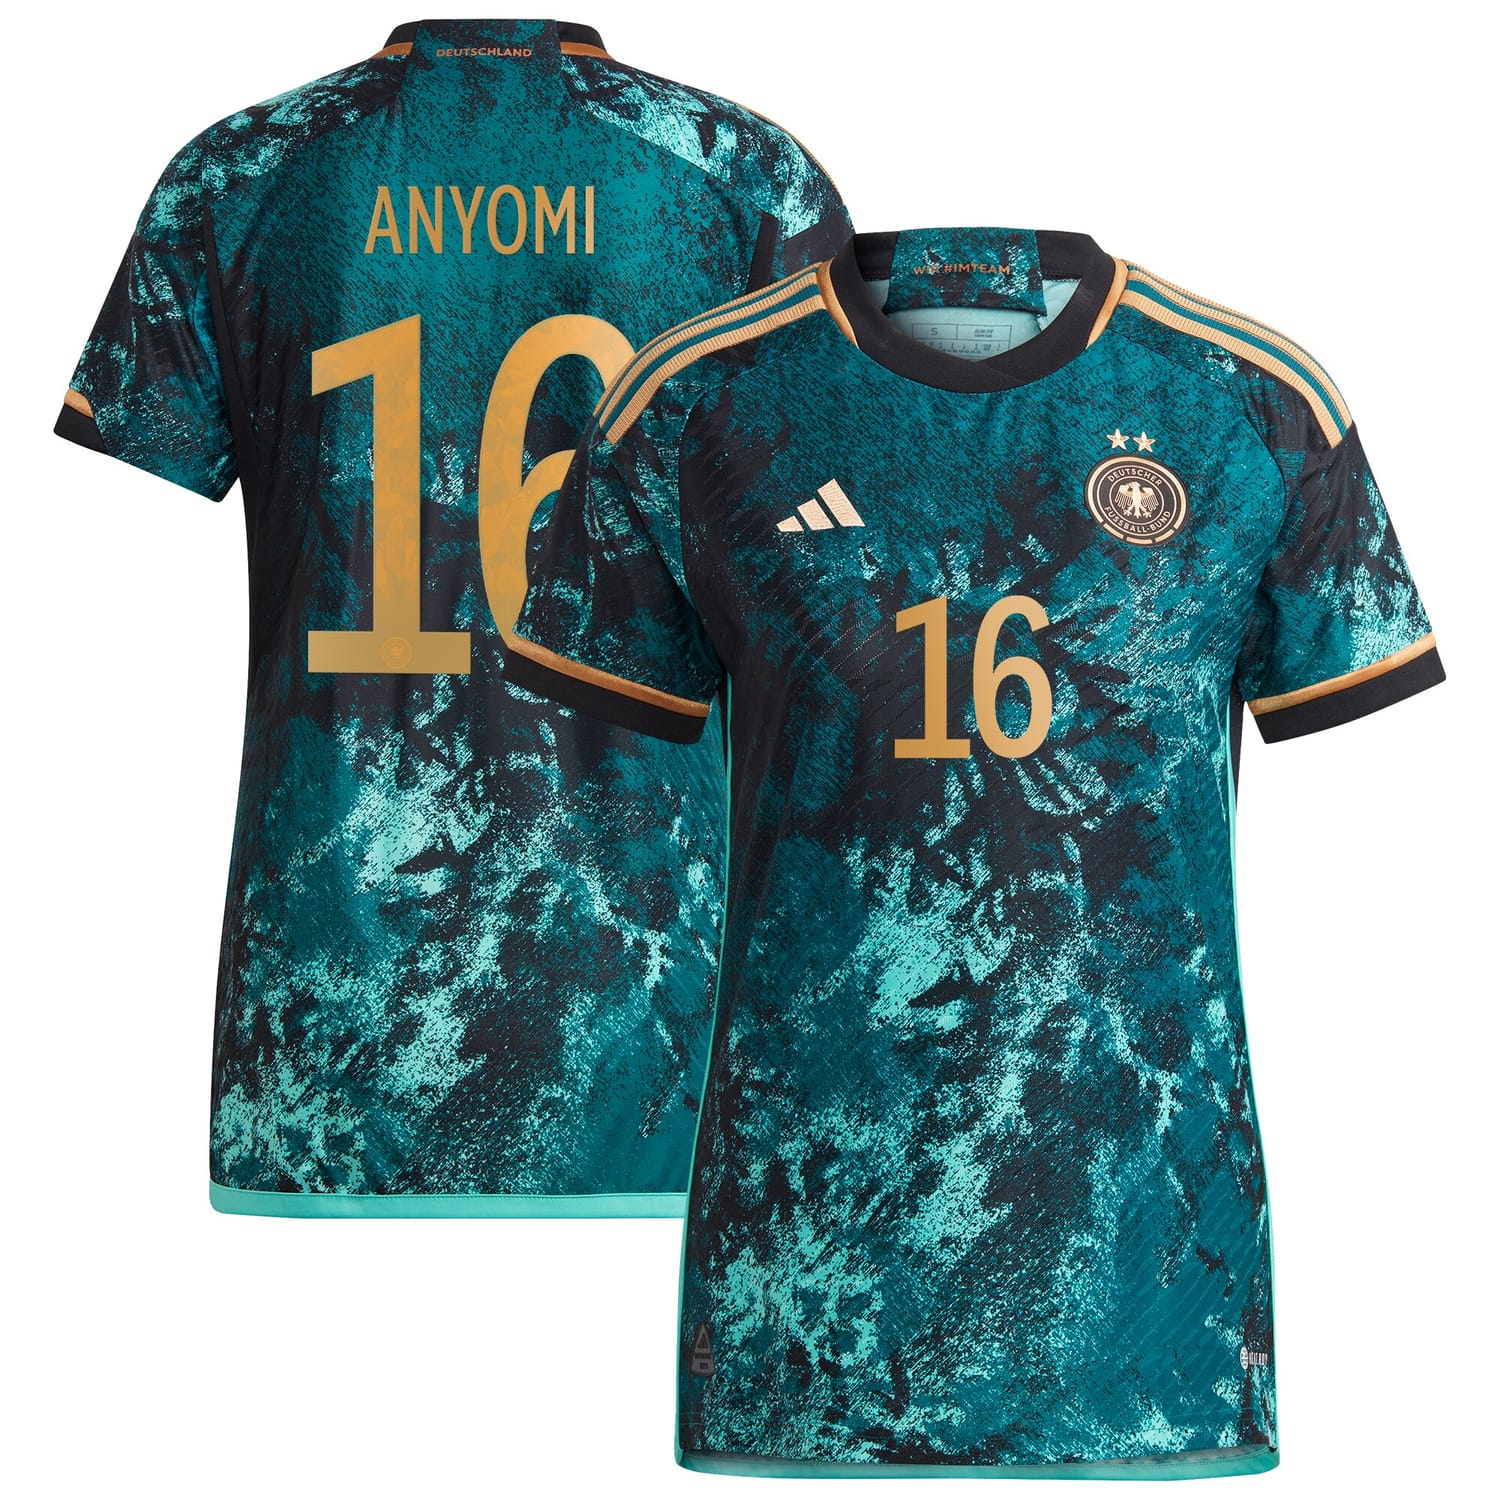 Germany National Team Away Authentic Jersey Shirt 2023 player Nicole Anyomi 25 printing for Women